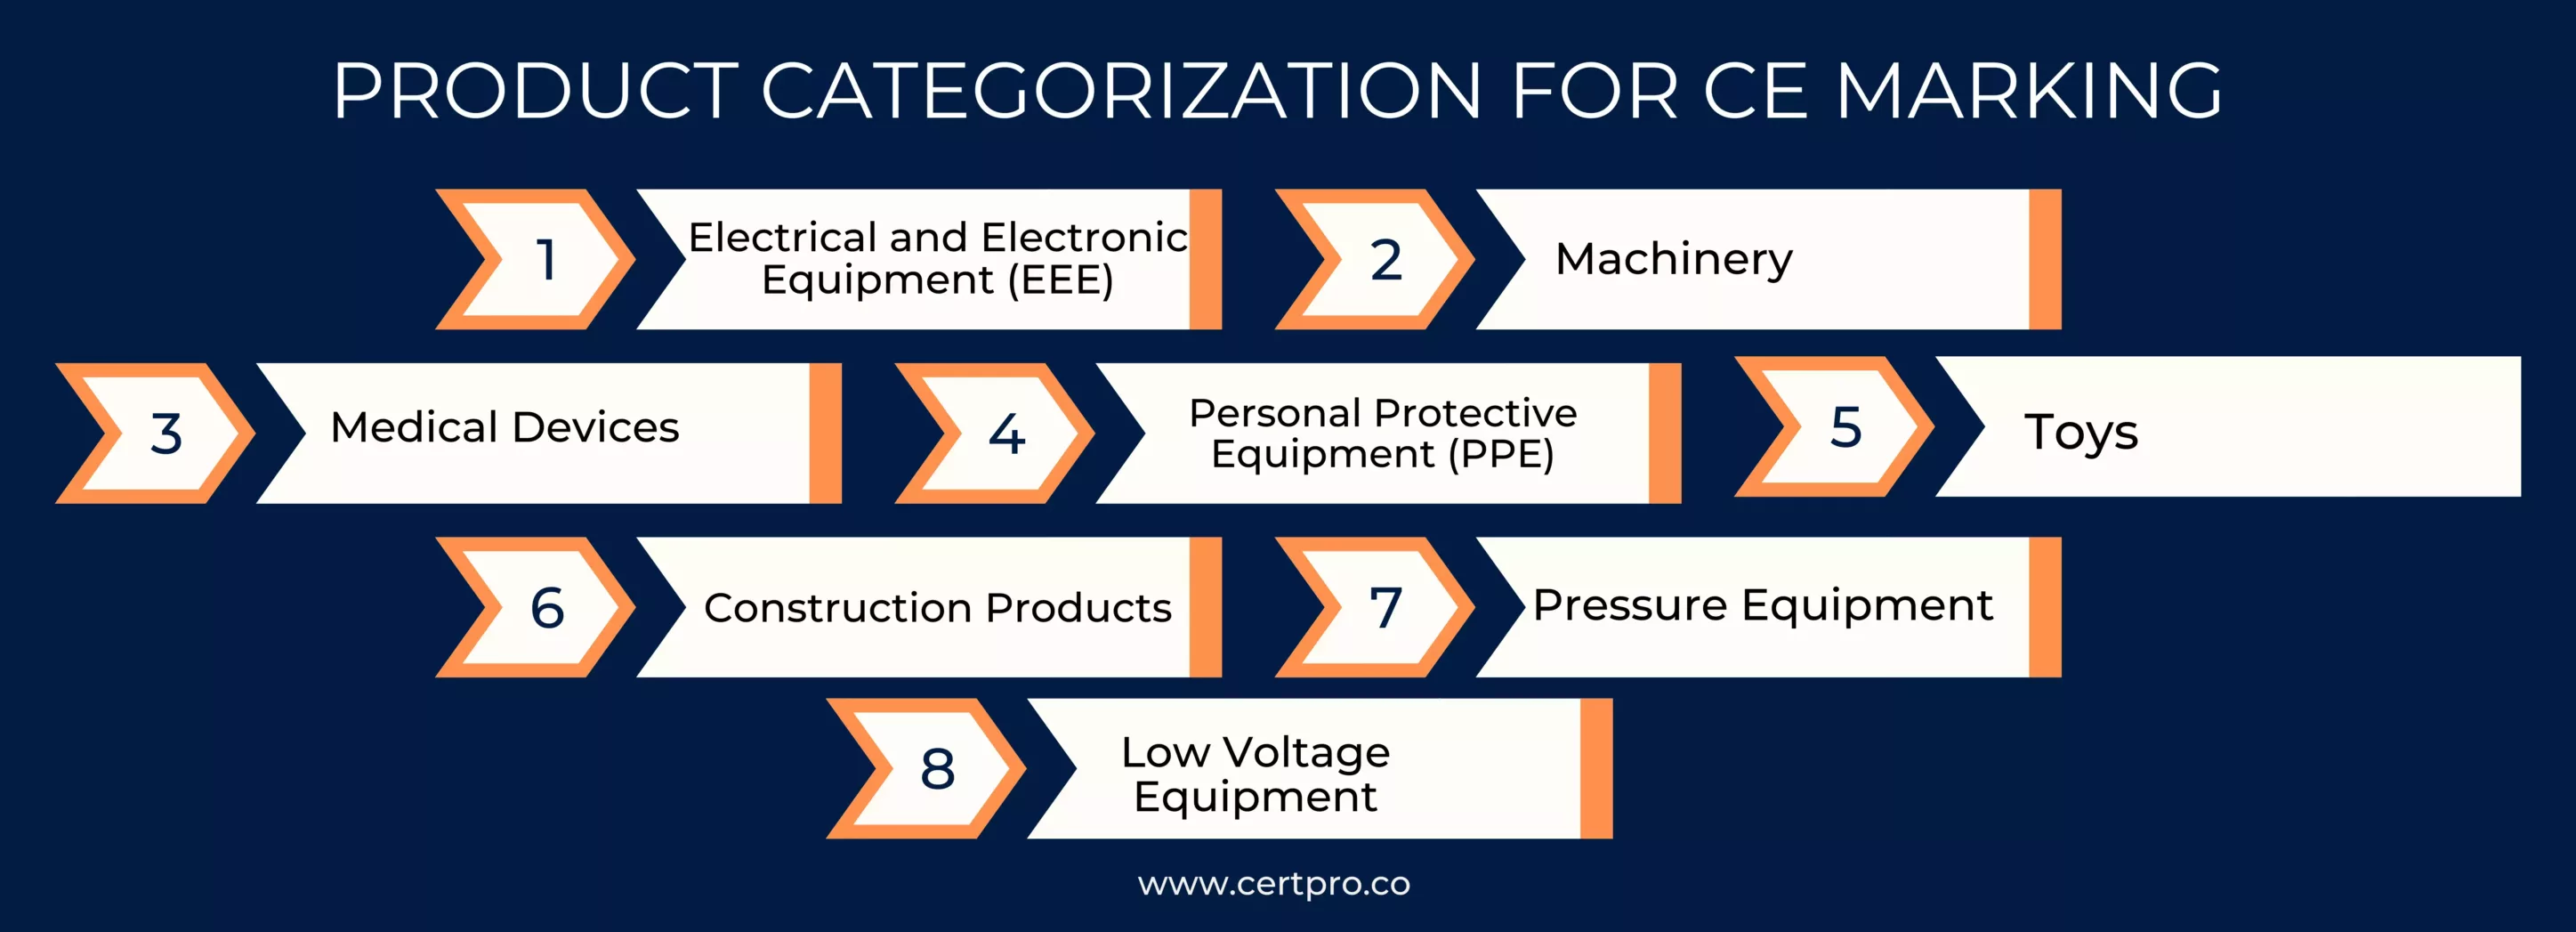 Product categorization for CE marking